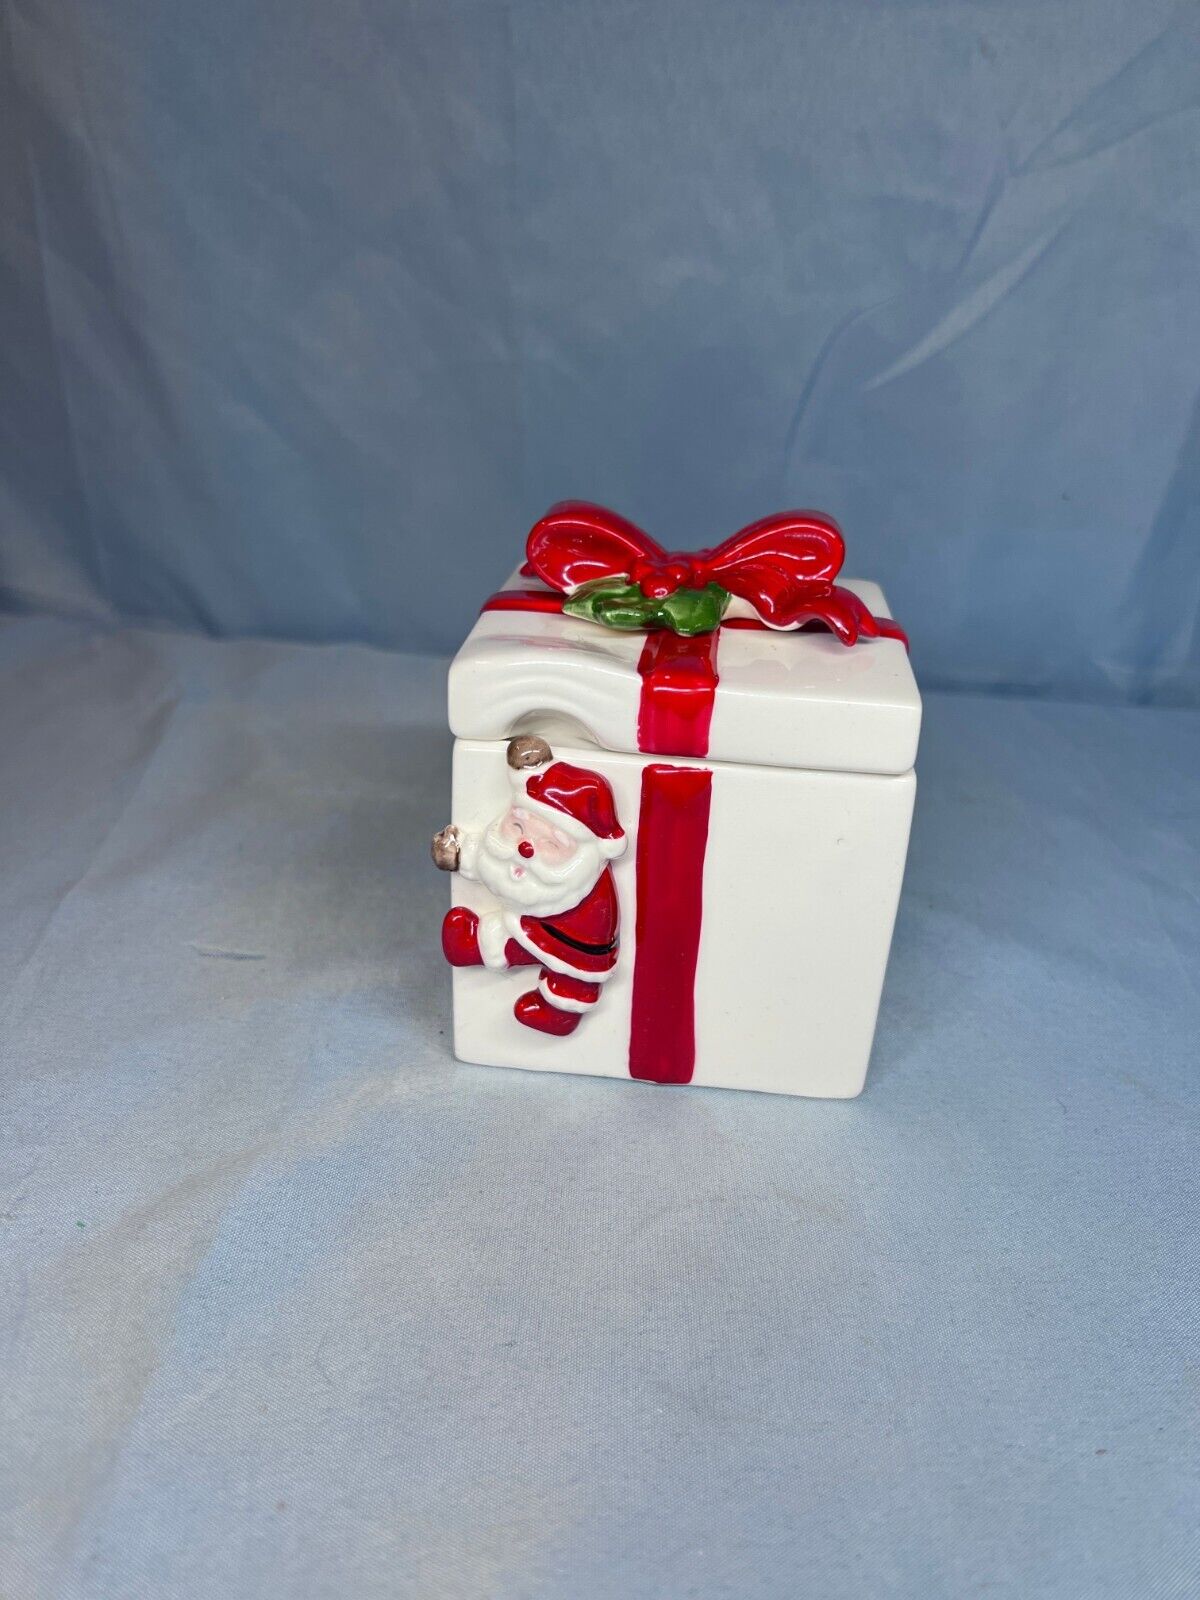 White Red Ceramic Santa Clause Embossed Cube Shaped Gift Trinket Box